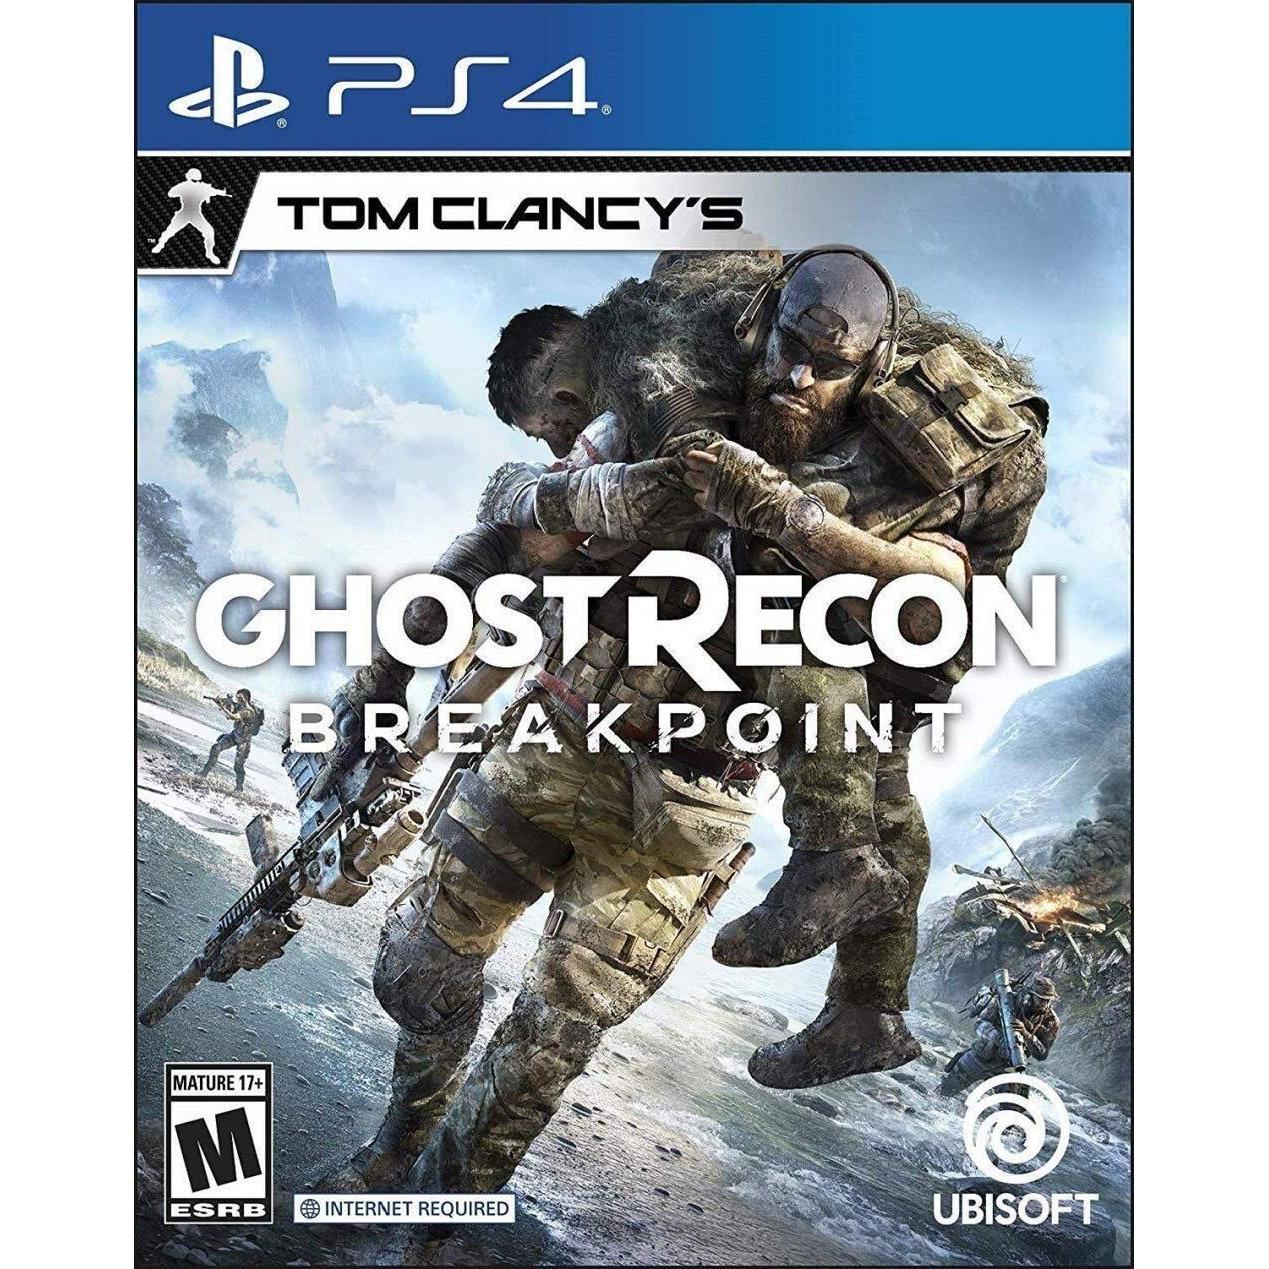 Tom Clancys Ghost Recon Breakpoint PS4 for $5.99 Shipped